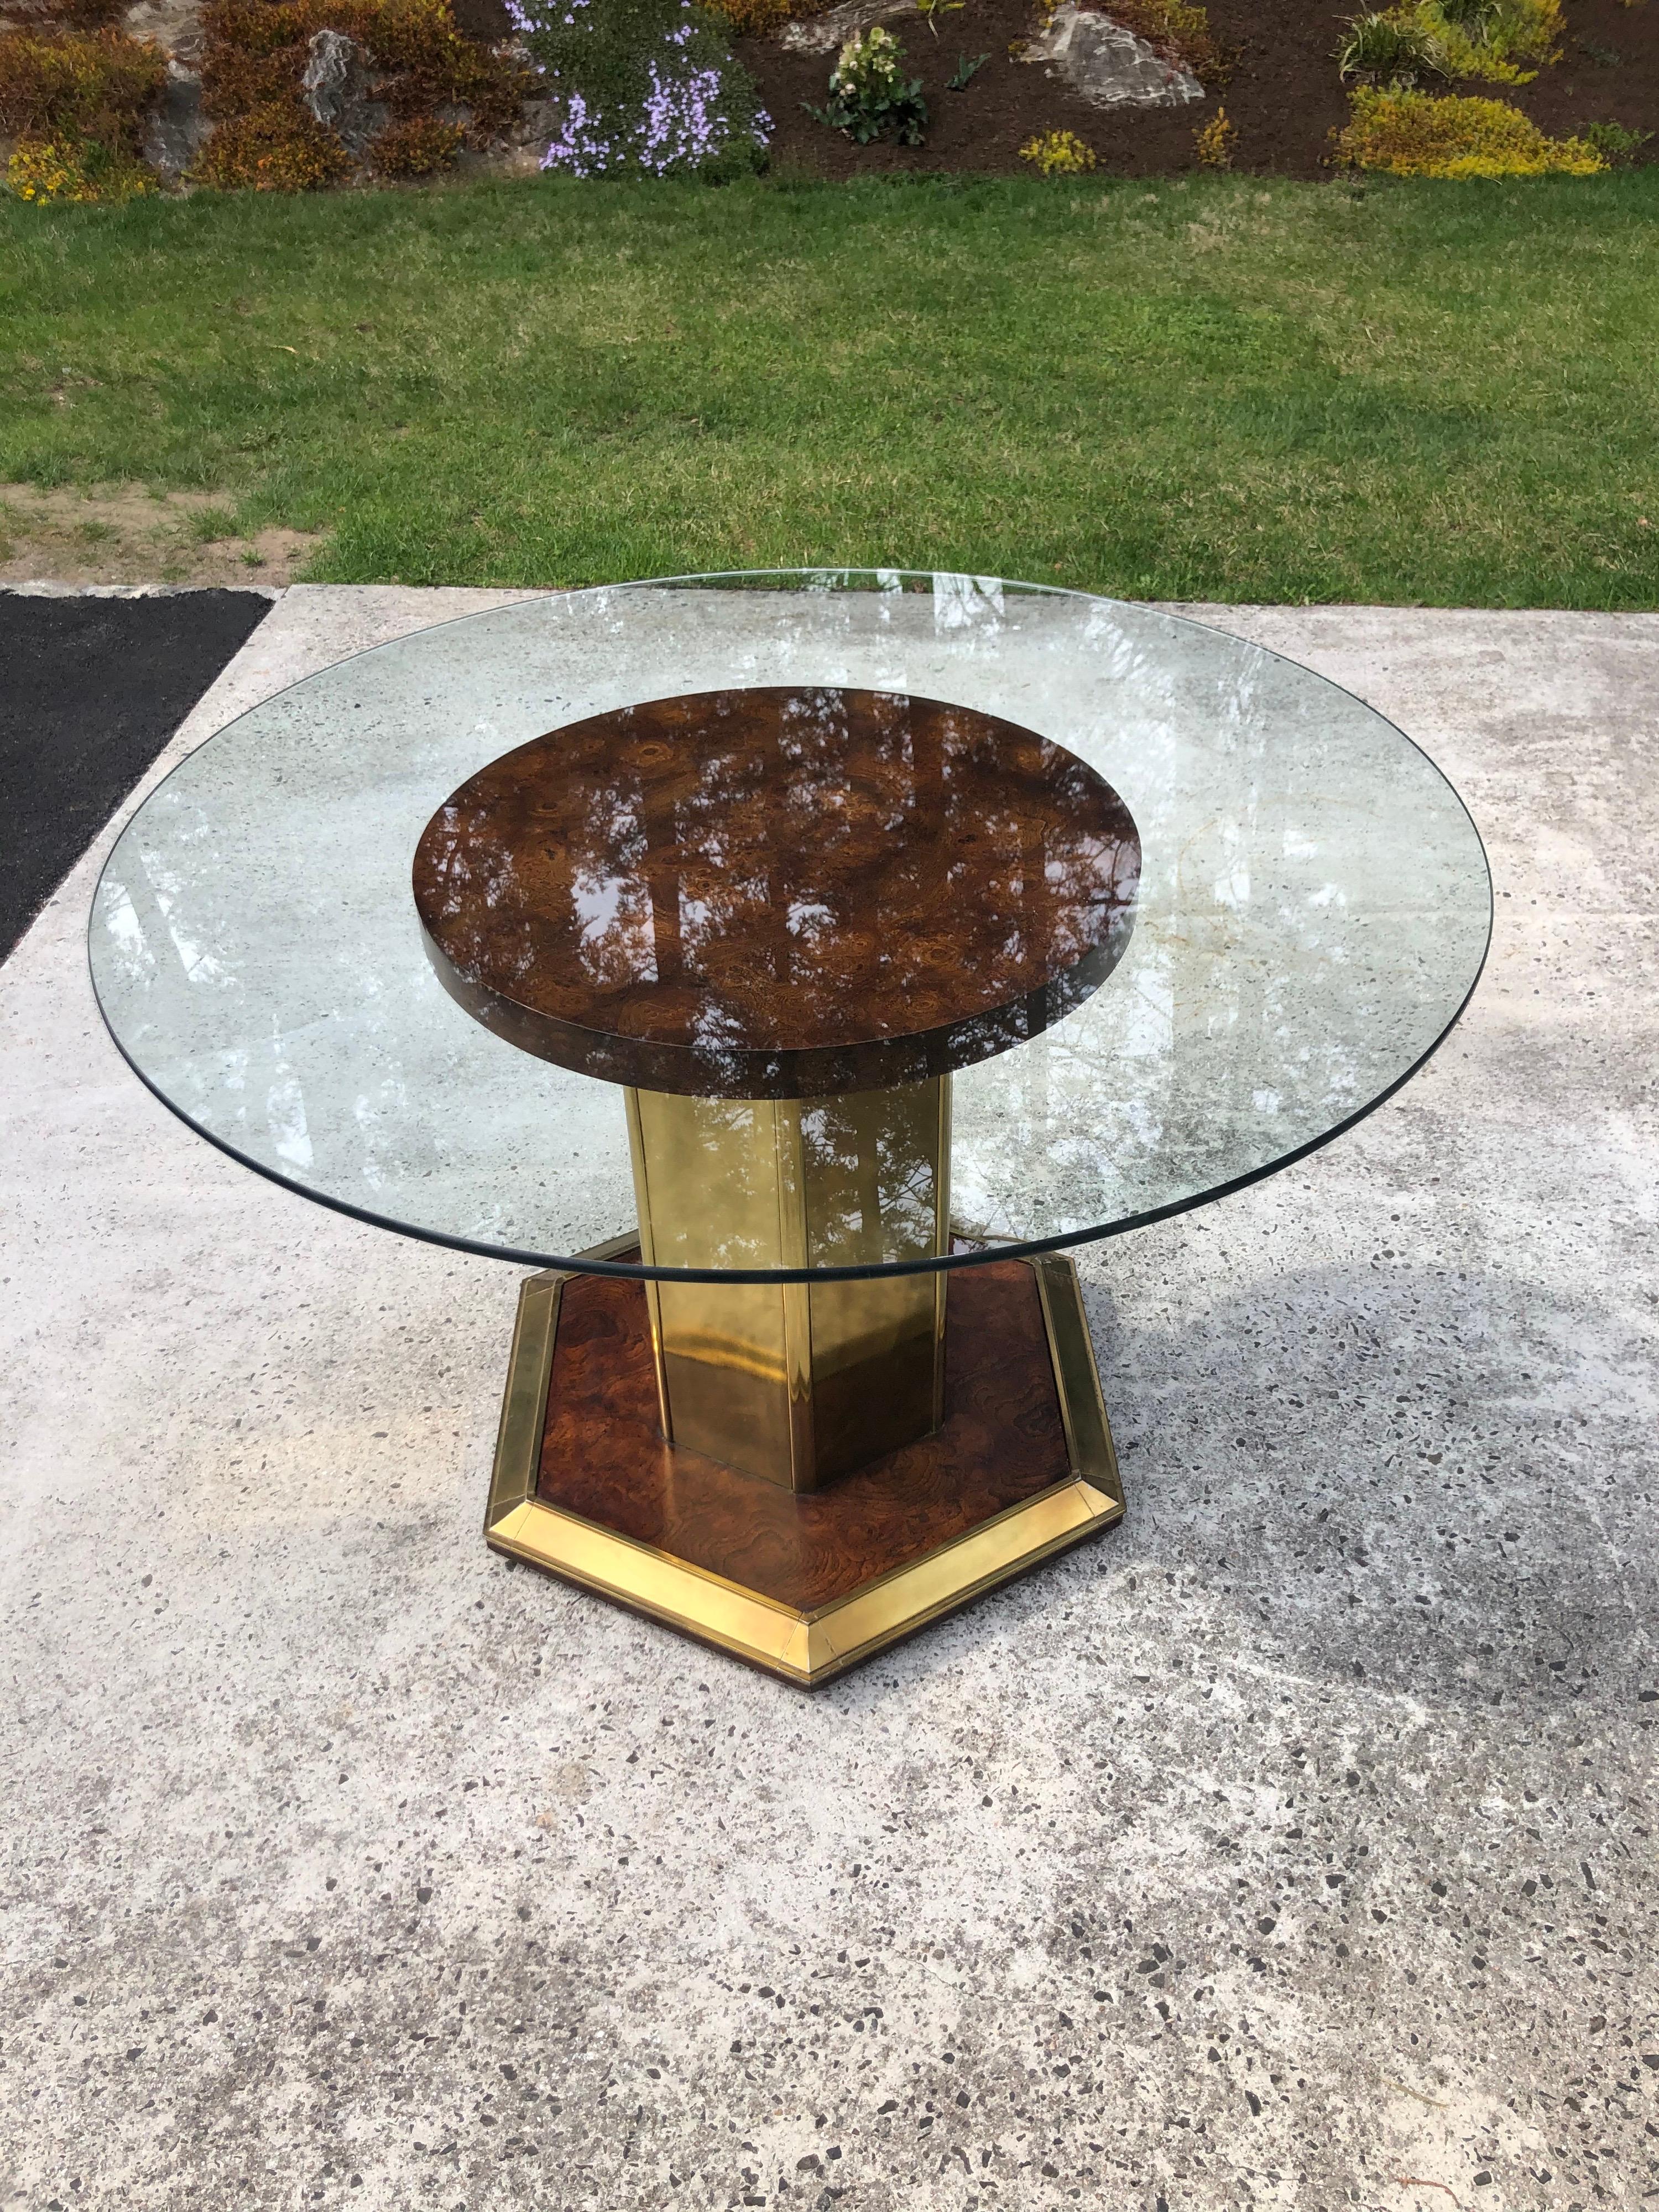 Henredon Style round burlwood dining table with round glass top.
Elegant and sophisticated this would fit in with mid century or Art Deco design.
 